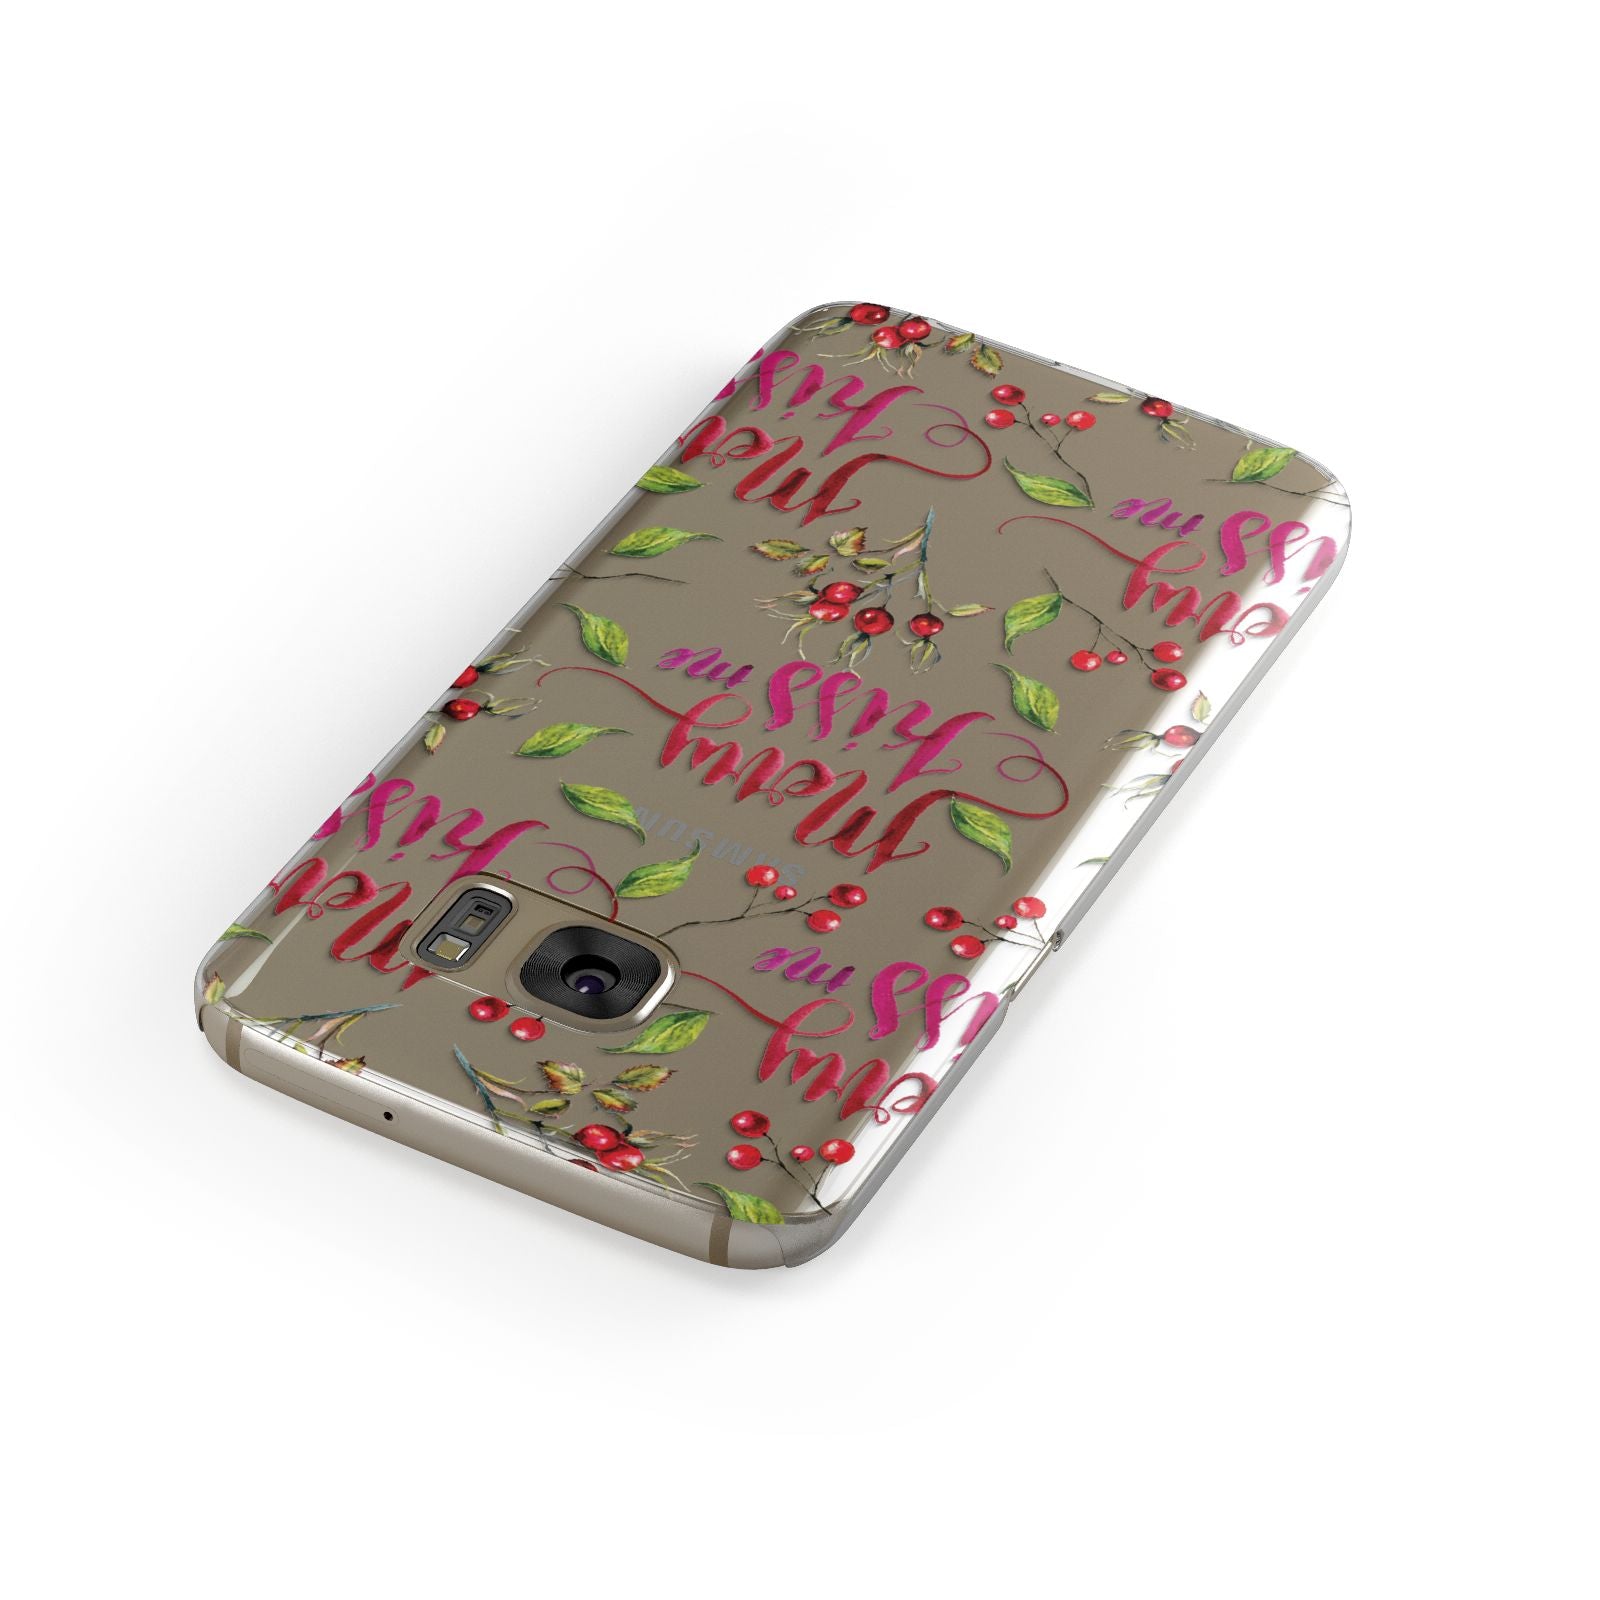 Merry kiss me Samsung Galaxy Case Front Close Up